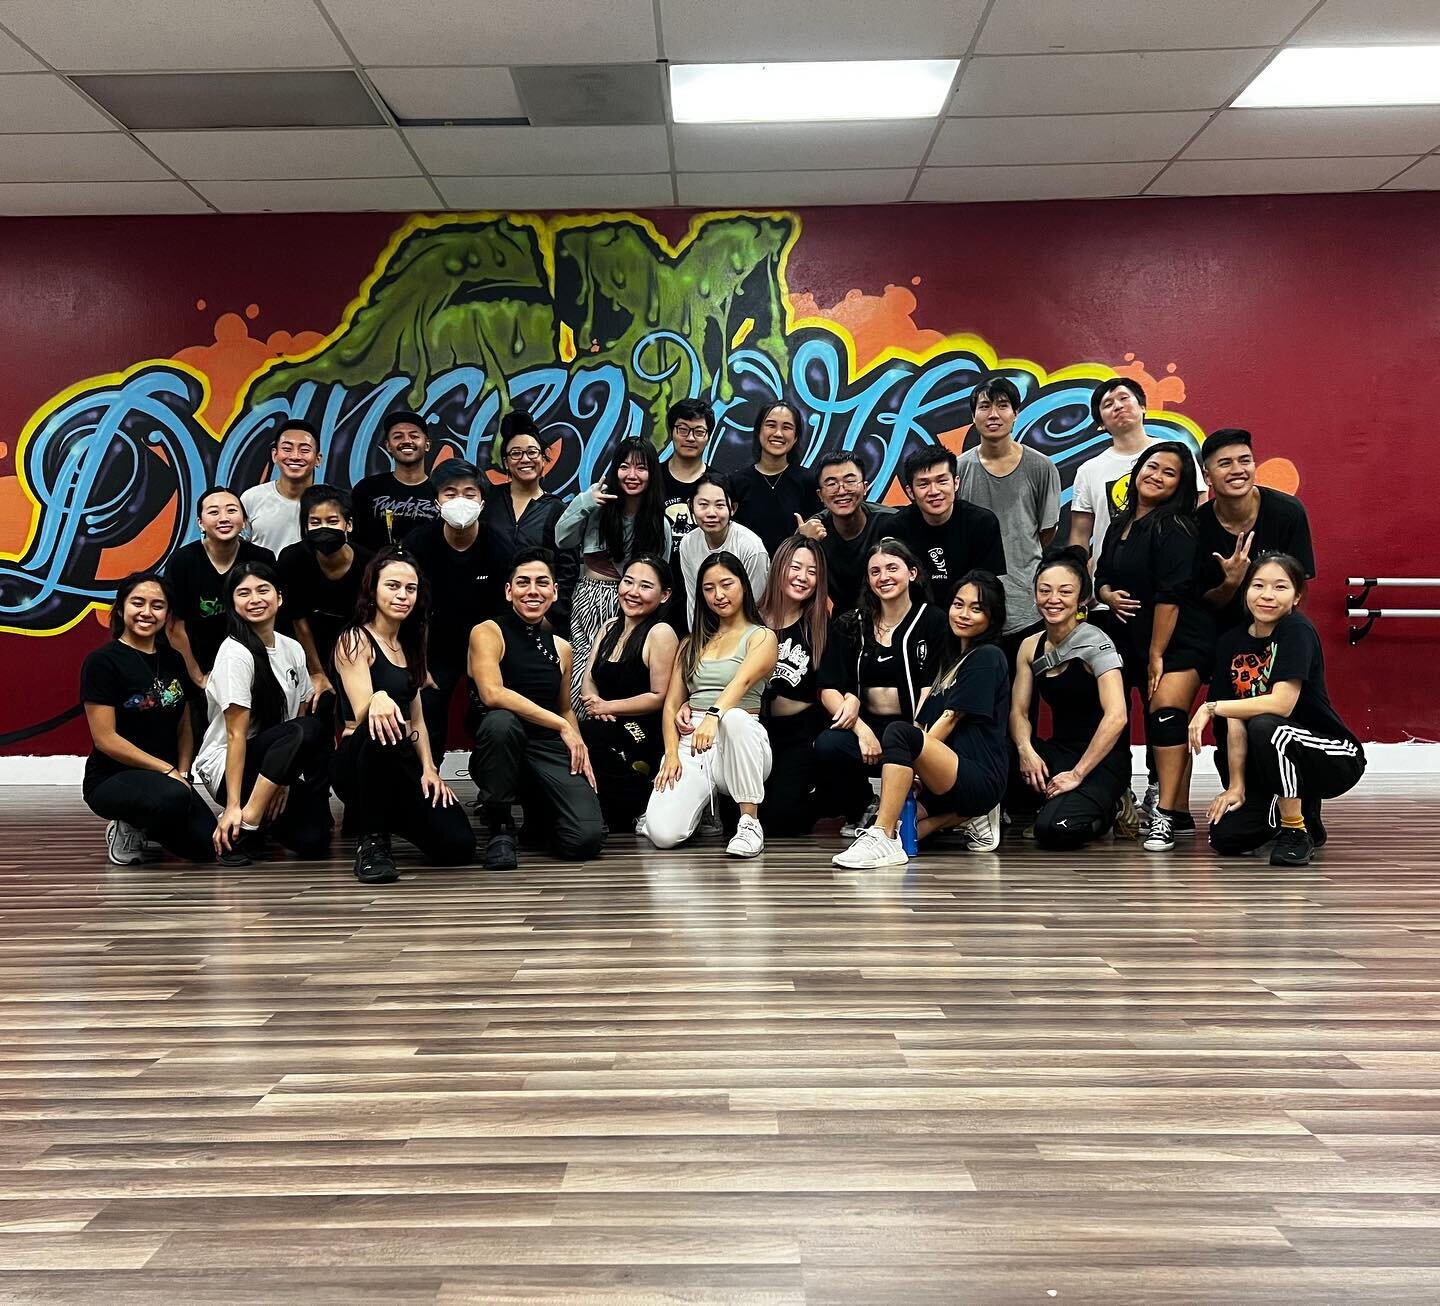 A belated thank you to @__gussi__ for taking time to come teach us one more time before his next chapter in New York. 💕💕 Can you spot the other alumni who came out to support? 👀

Show him some love in the comments!
&bull;
&bull;
&bull;
&bull;
&bul